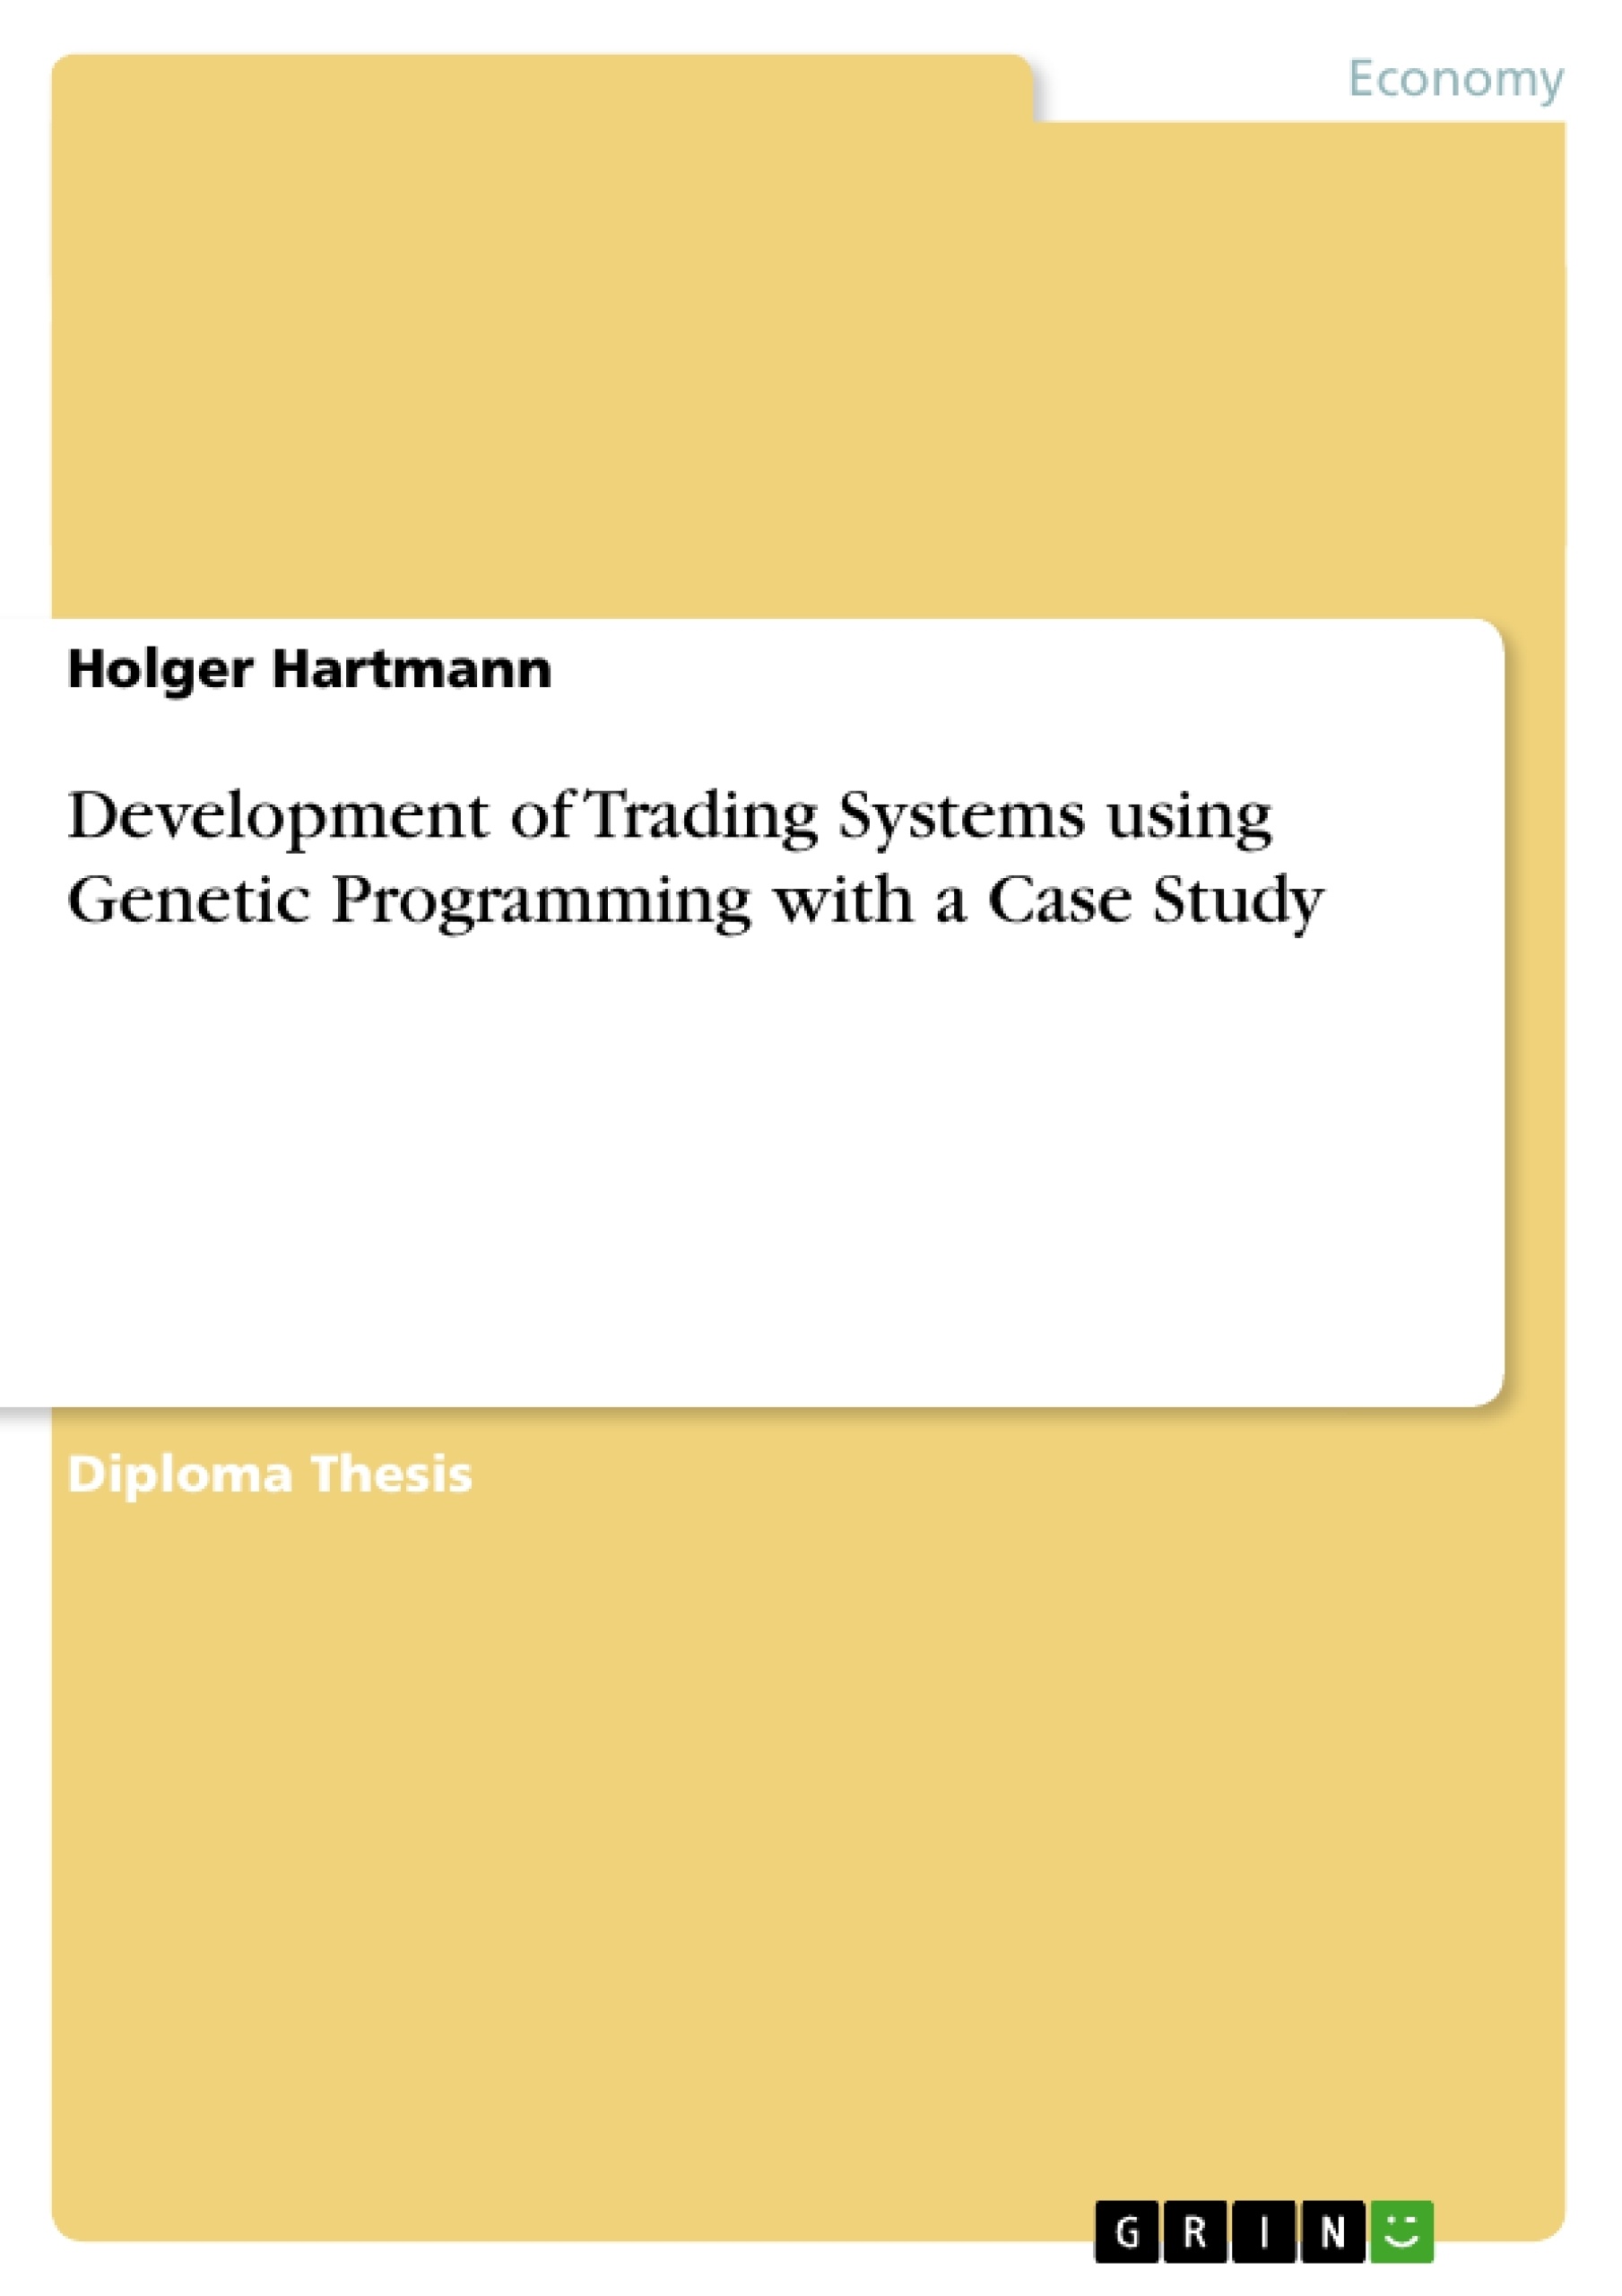 Title: Development of Trading Systems using Genetic Programming with a Case Study